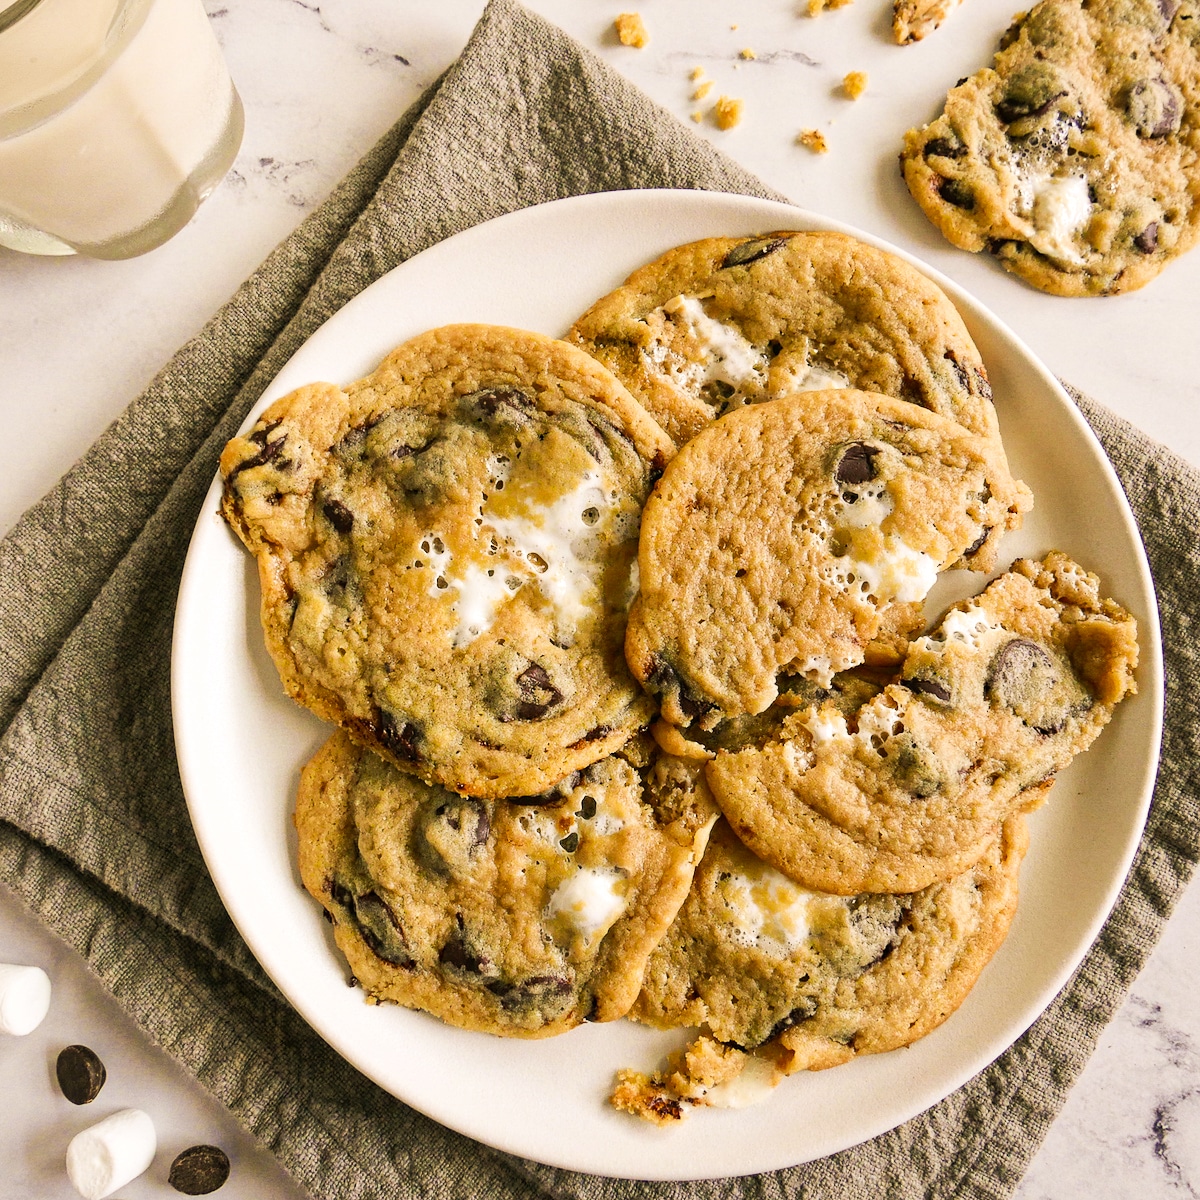 Gooey marshmallow chocolate chip cookies arranged on a white plate.